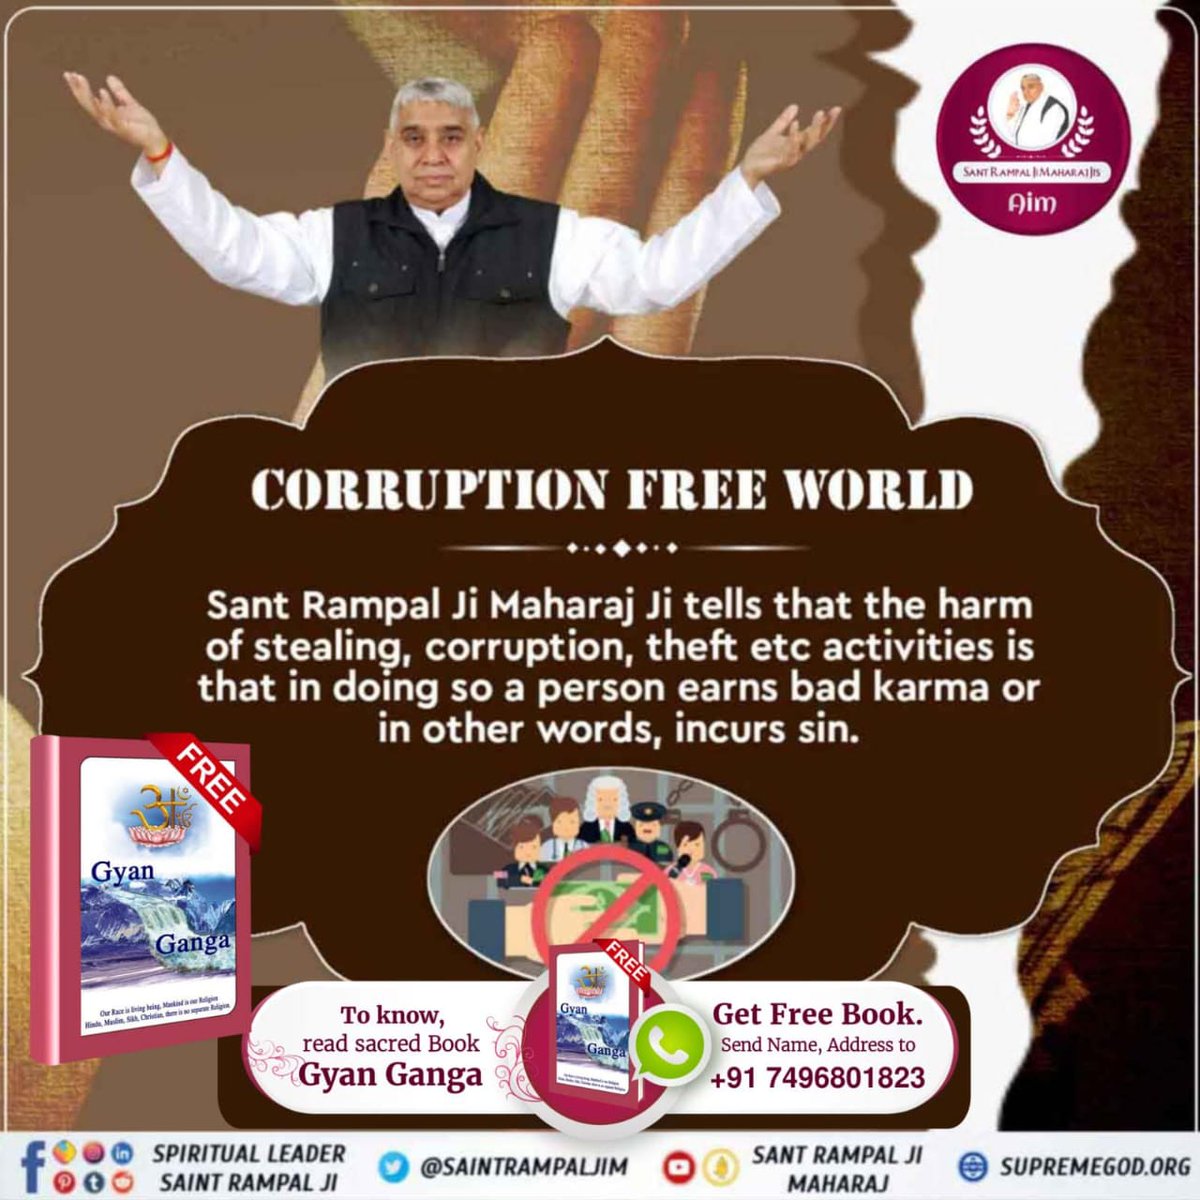 #GodNightMonday Sant Rampal Ji Maharaj Ji tells that the harm of stealing, corruption, theft etc activities is that in doing so a person earns bad karma or in other words, incurs sin.